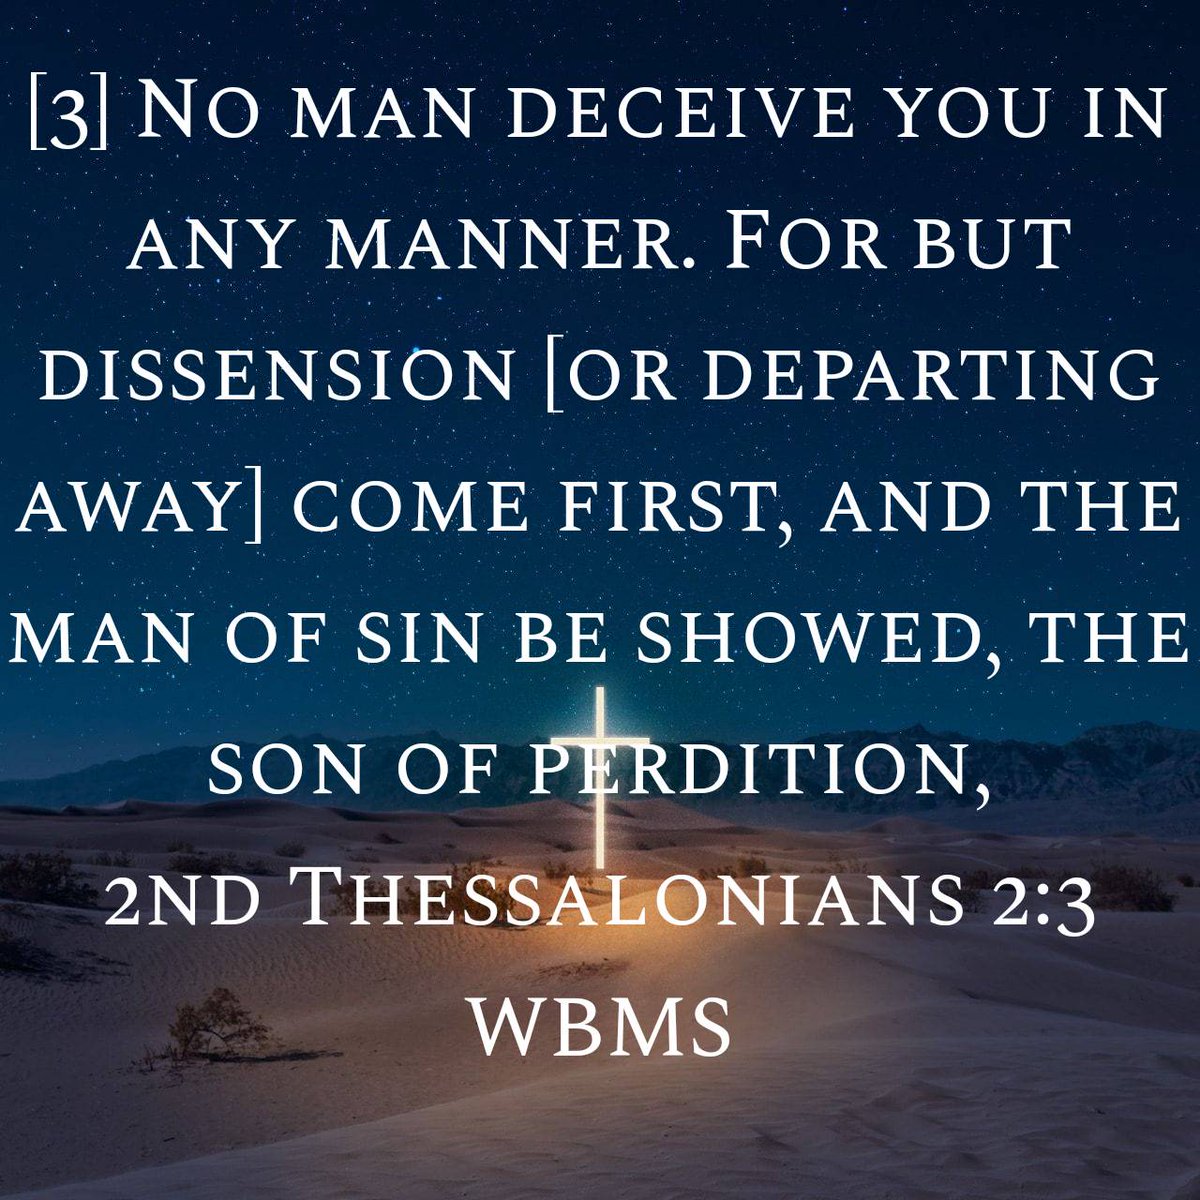 2nd Thessalonians 2:3 WBMS
[3] No man deceive you in any manner. For but dissension [or departing away] come first, and the man of sin be showed, the son of perdition,

bible.com/bible/2407/2th…